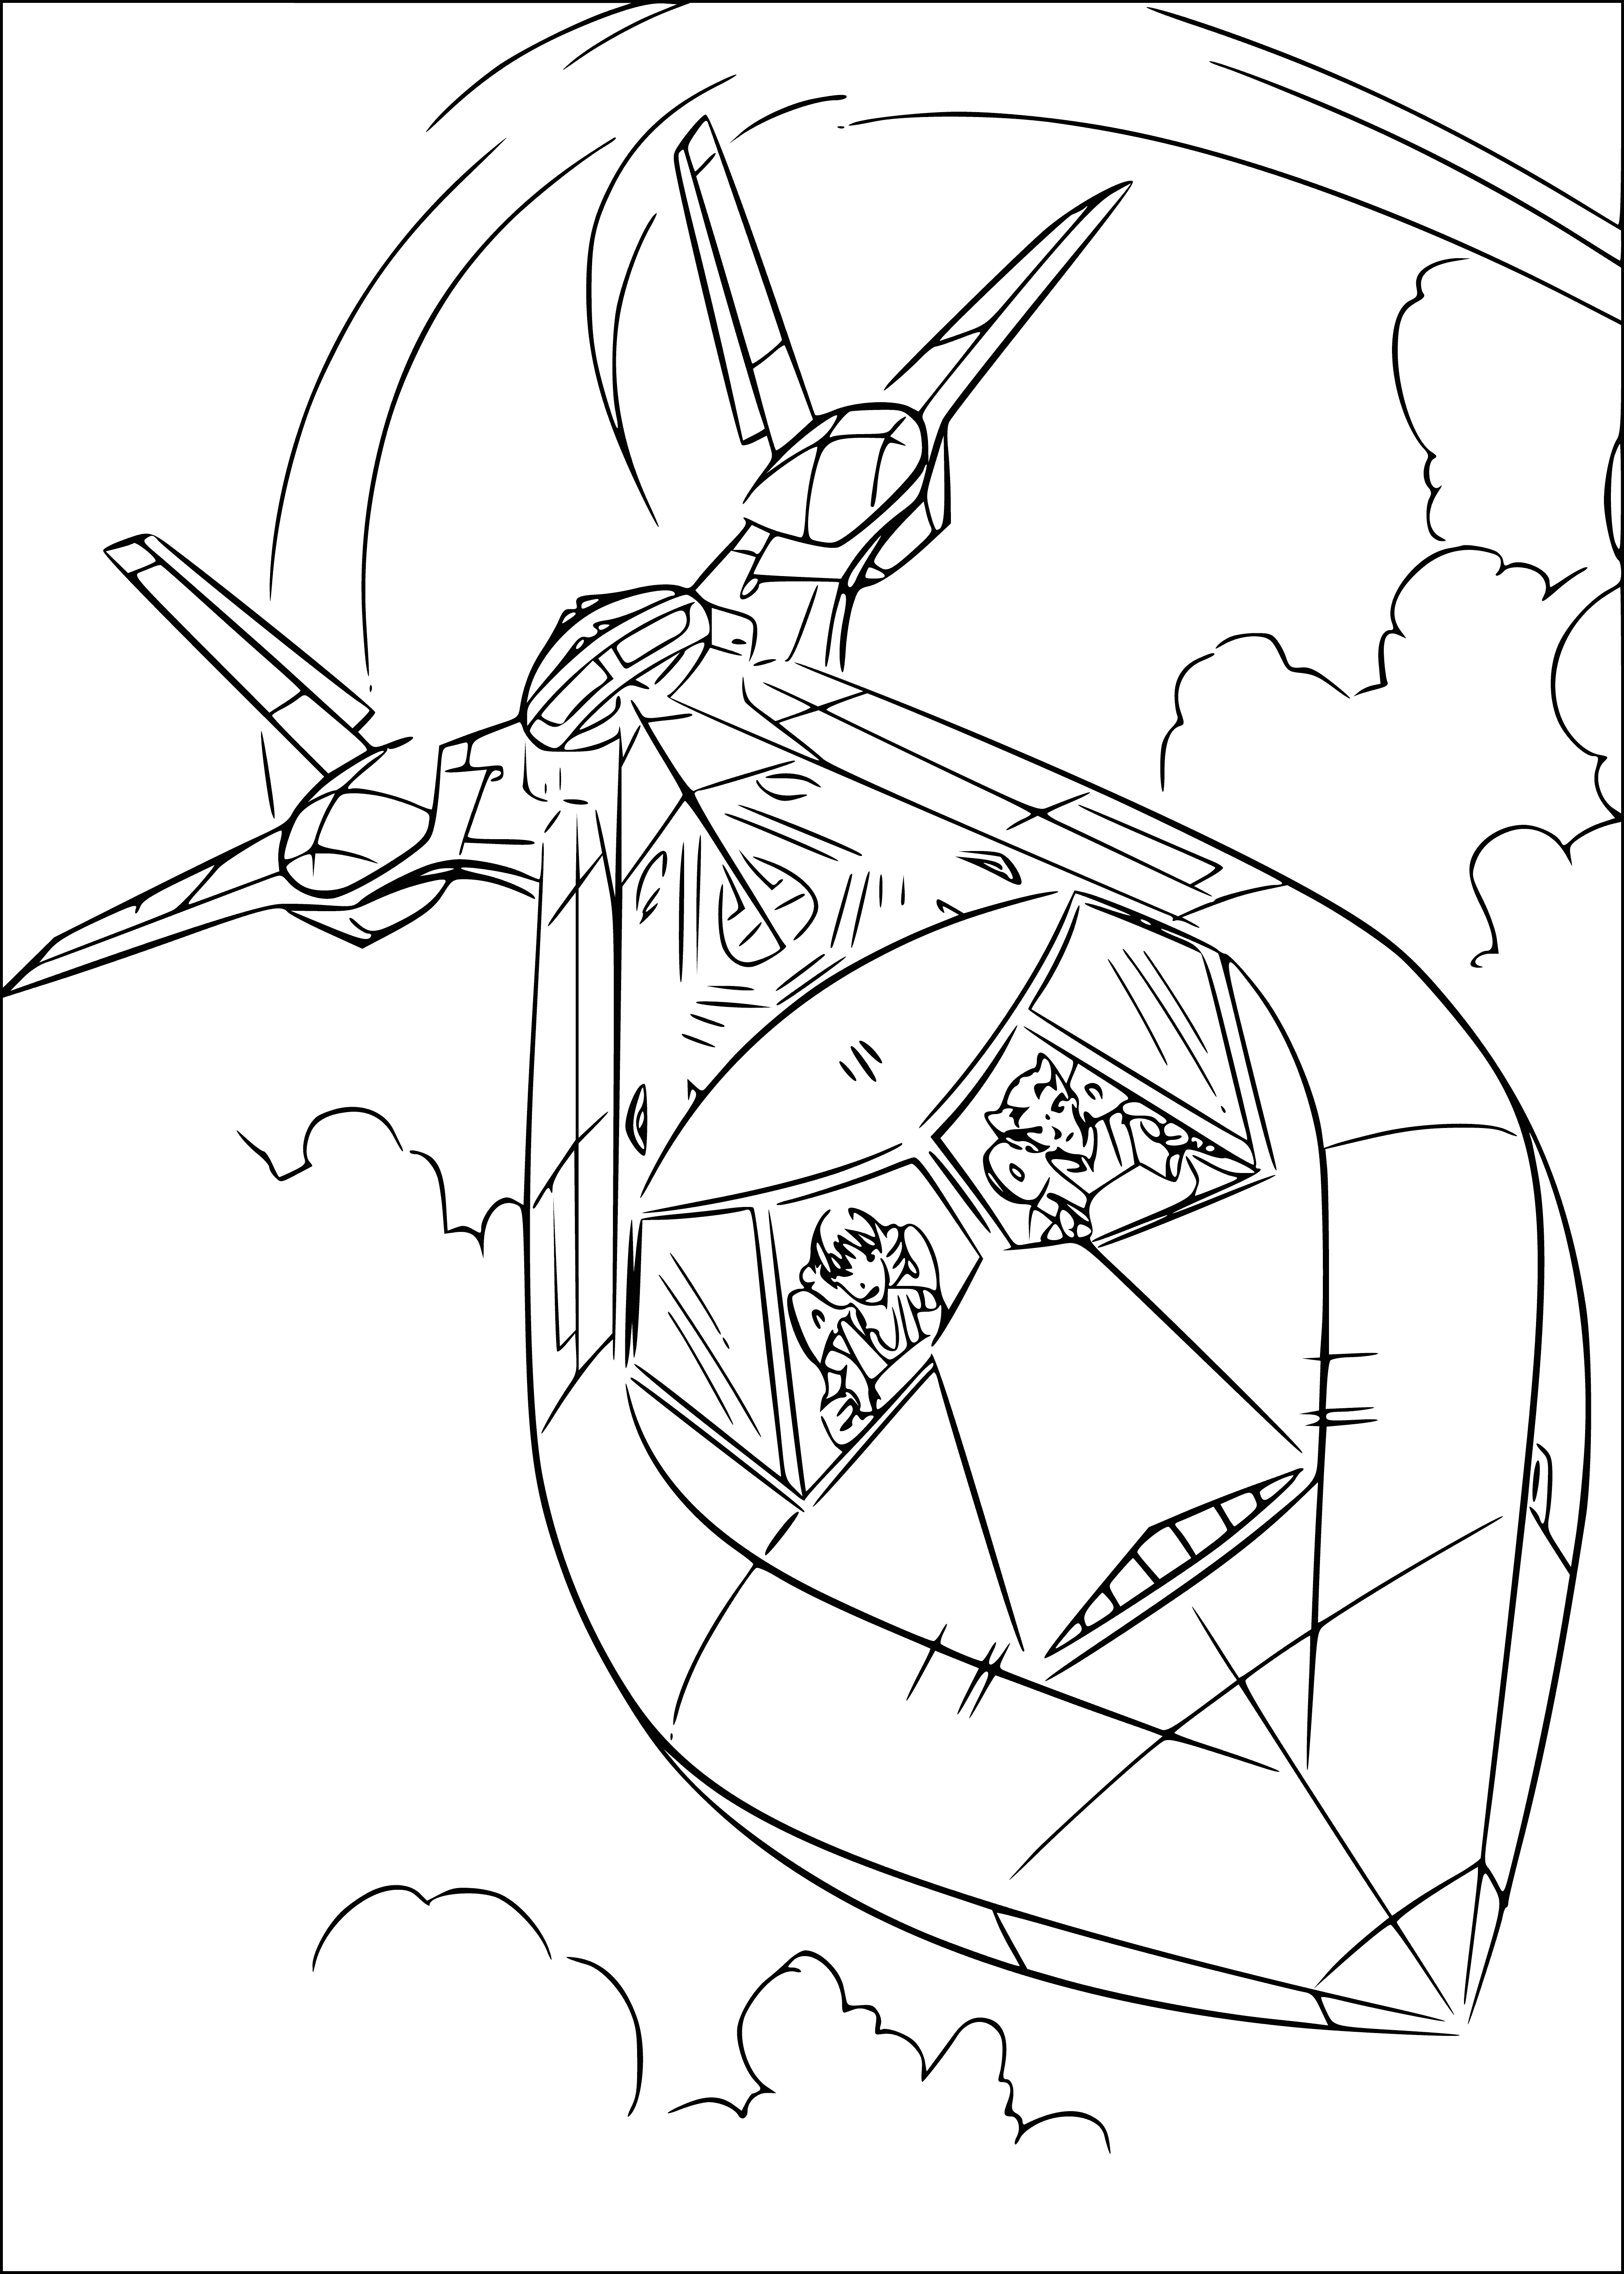 coloring page: The X-men use their powers to fight evil and protect humanity. Led by Prof. X, they train at the Xavier Institute to control their powers. X-men have a long history of defeating villains like Magneto & Dark Phoenix.